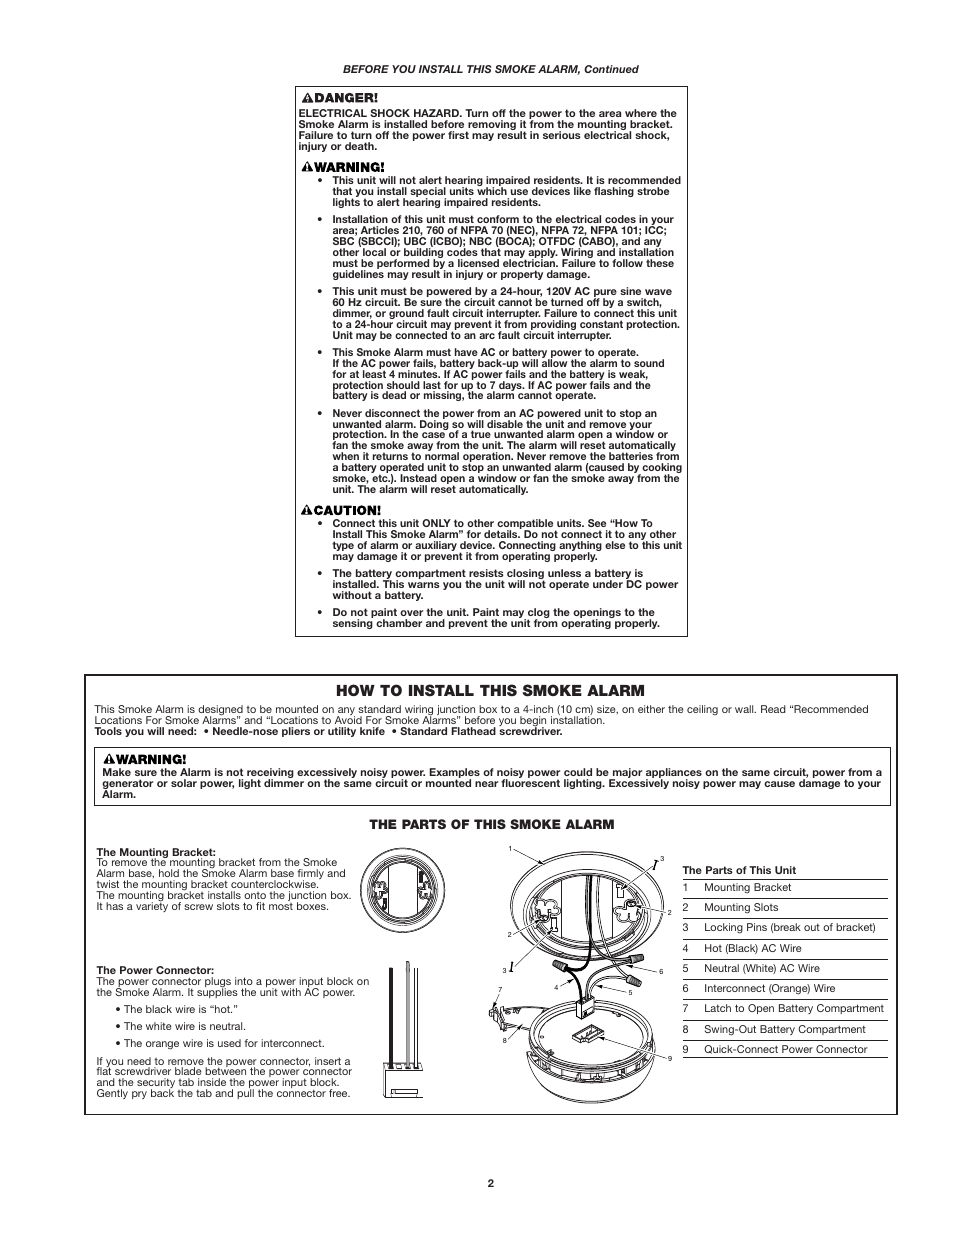 How to install this smoke alarm | First Alert 9120B User Manual | Page 2 / 7